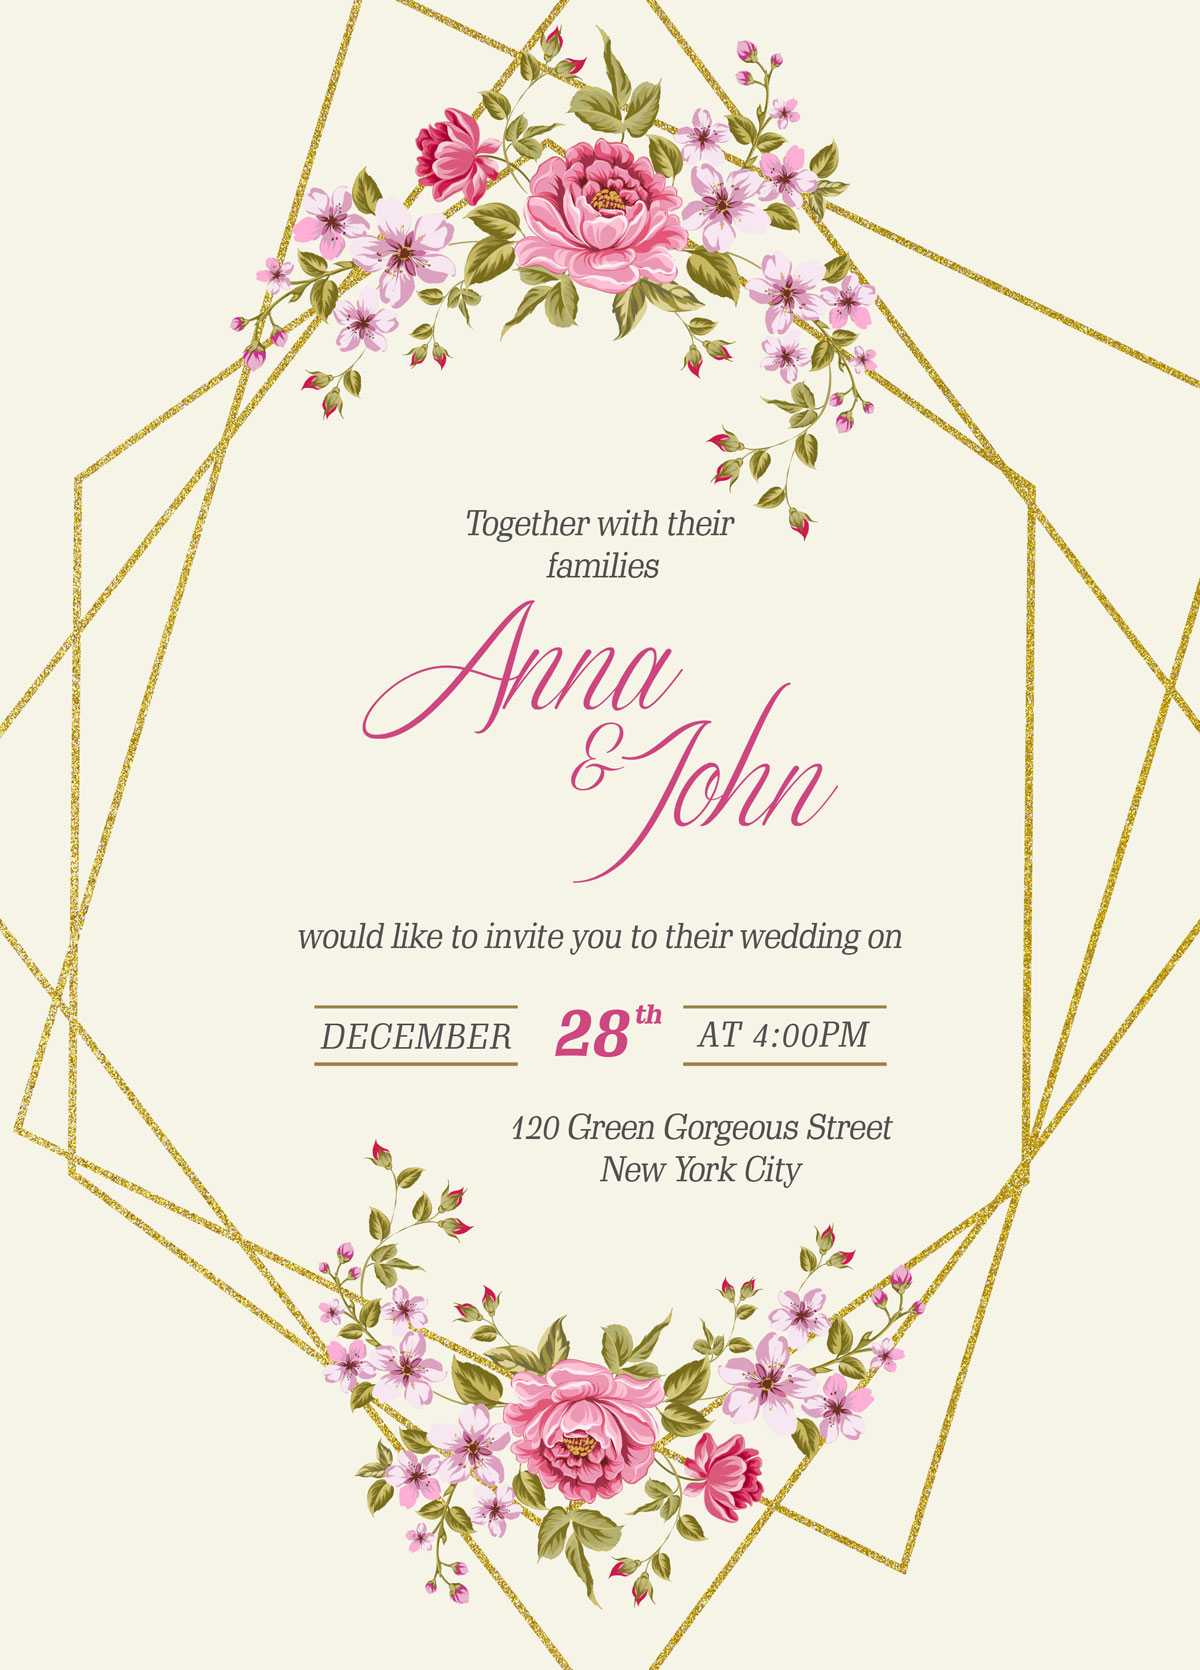 Free Wedding Invitation Card Template & Mockup Psd | Designbolts Throughout Invitation Cards Templates For Marriage